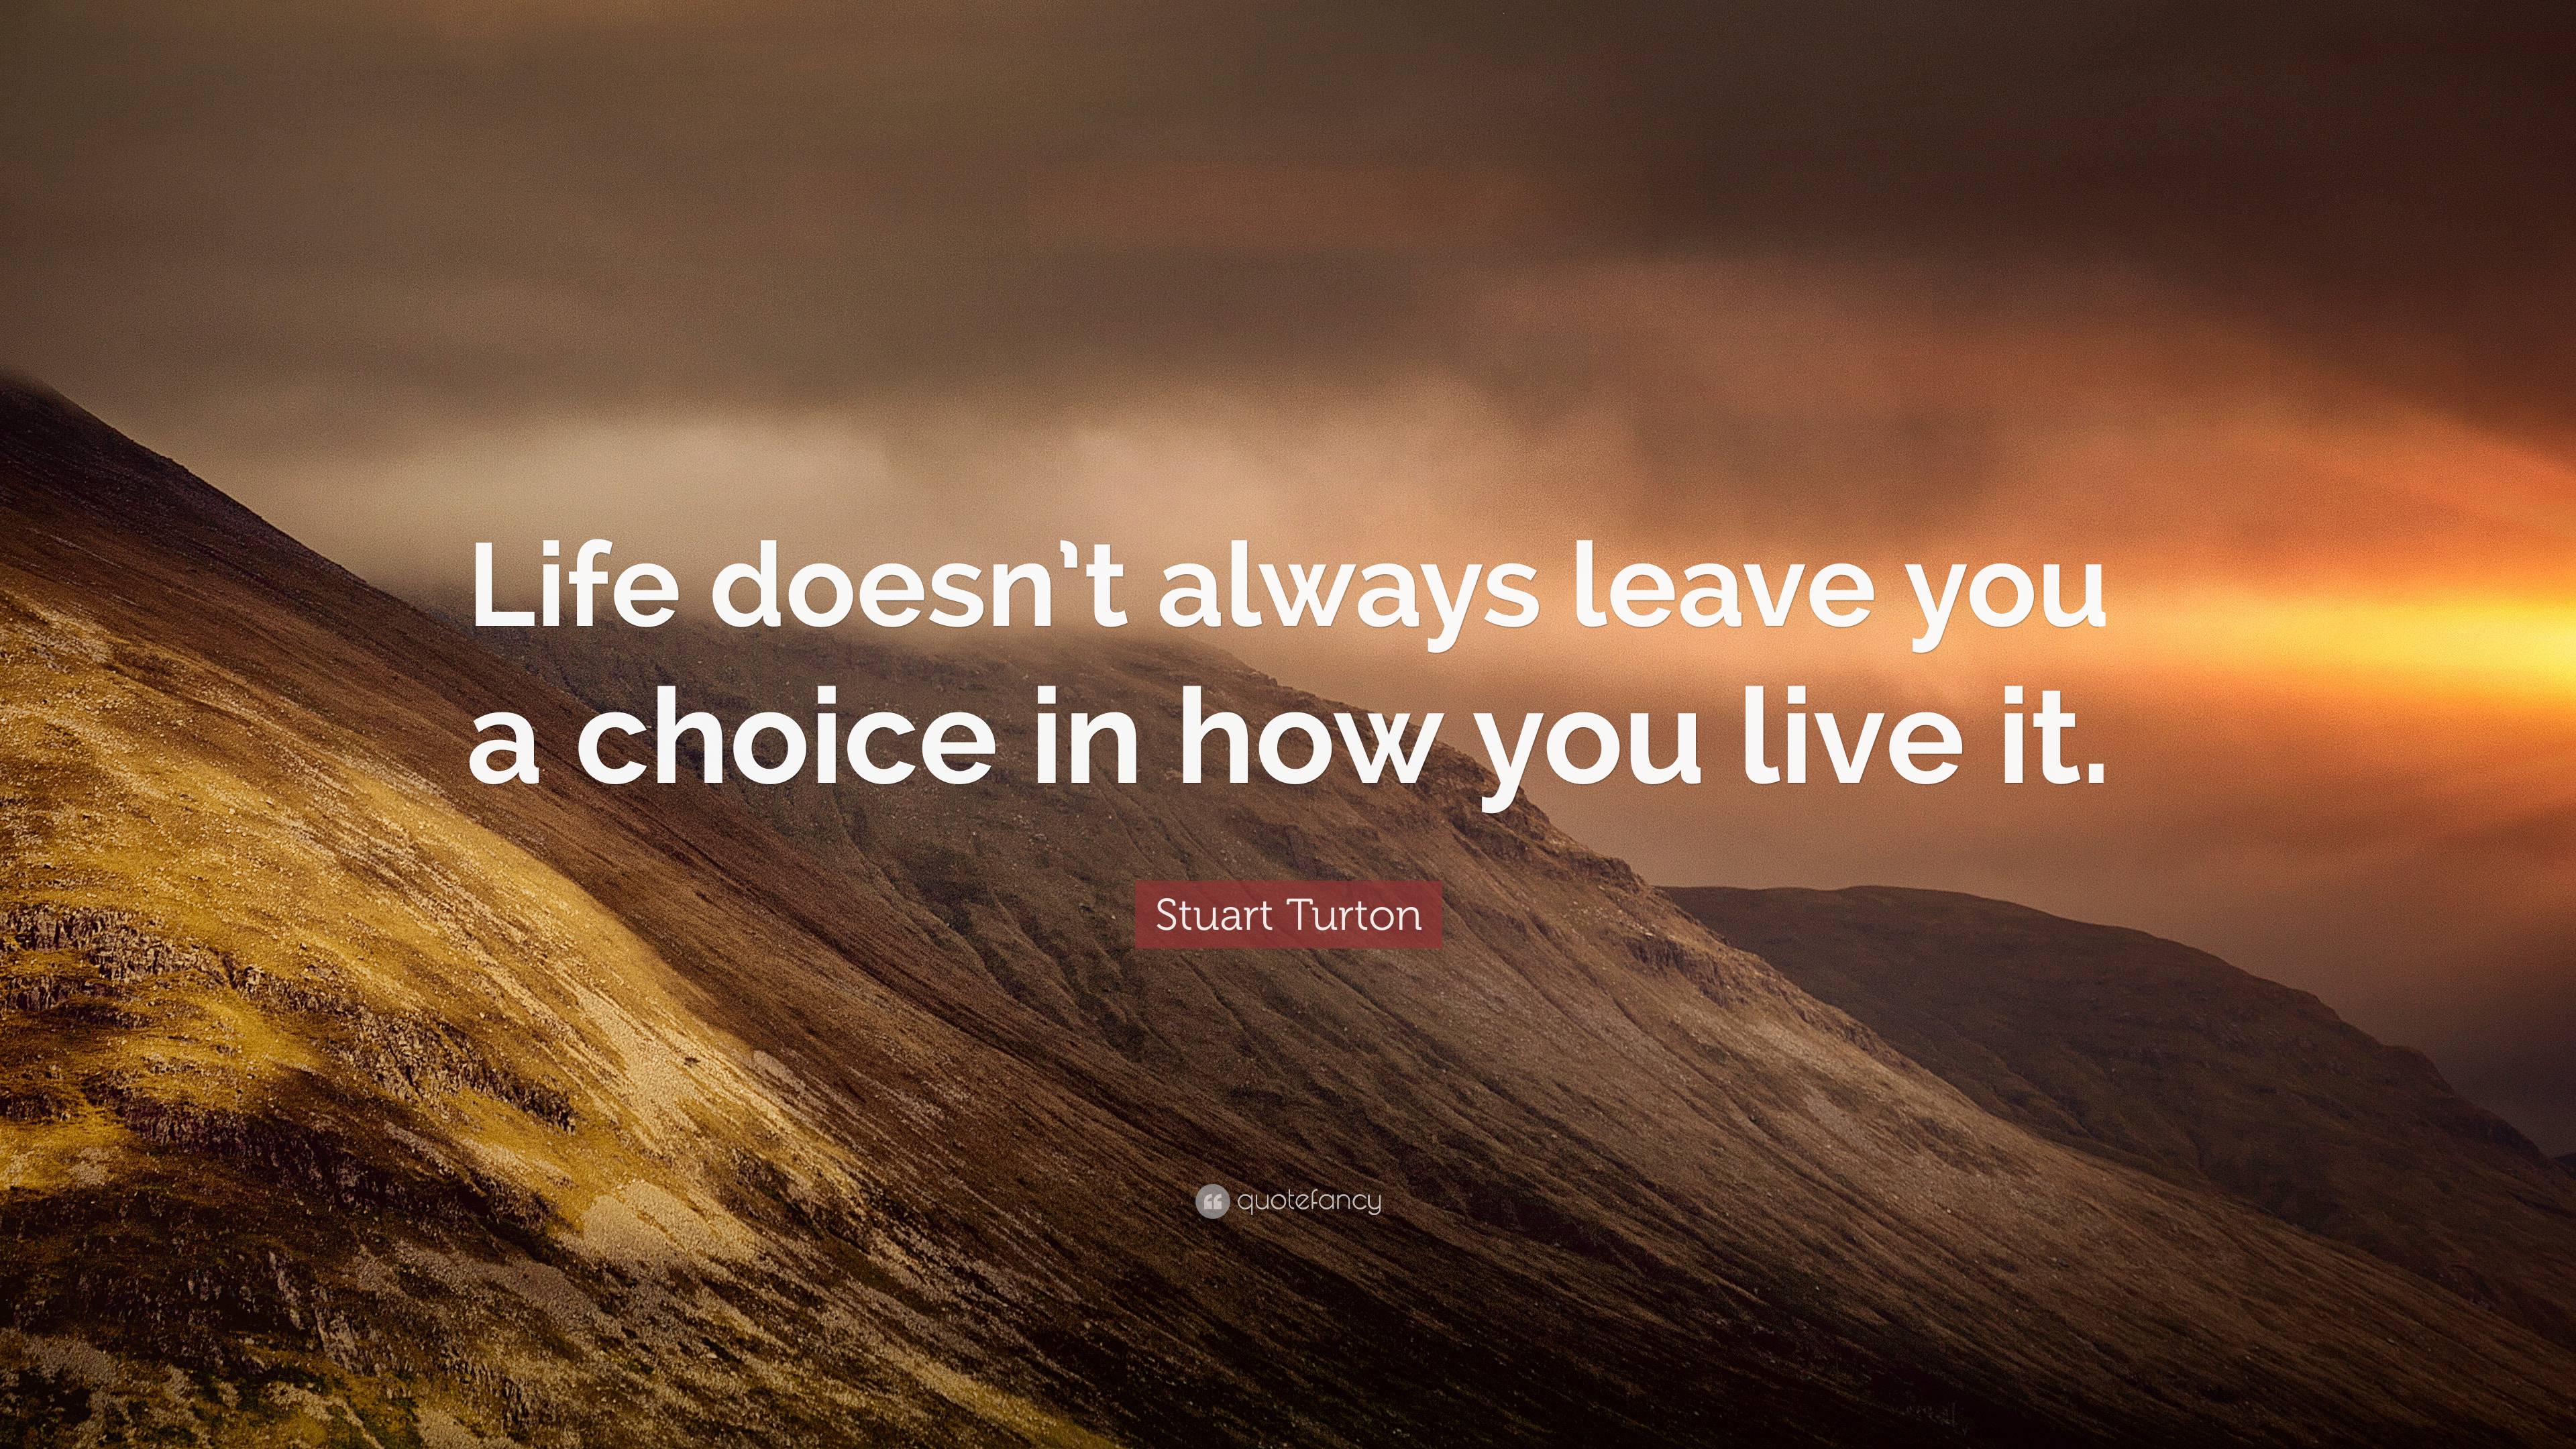 Stuart Turton Quote: “Life doesn’t always leave you a choice in how you ...